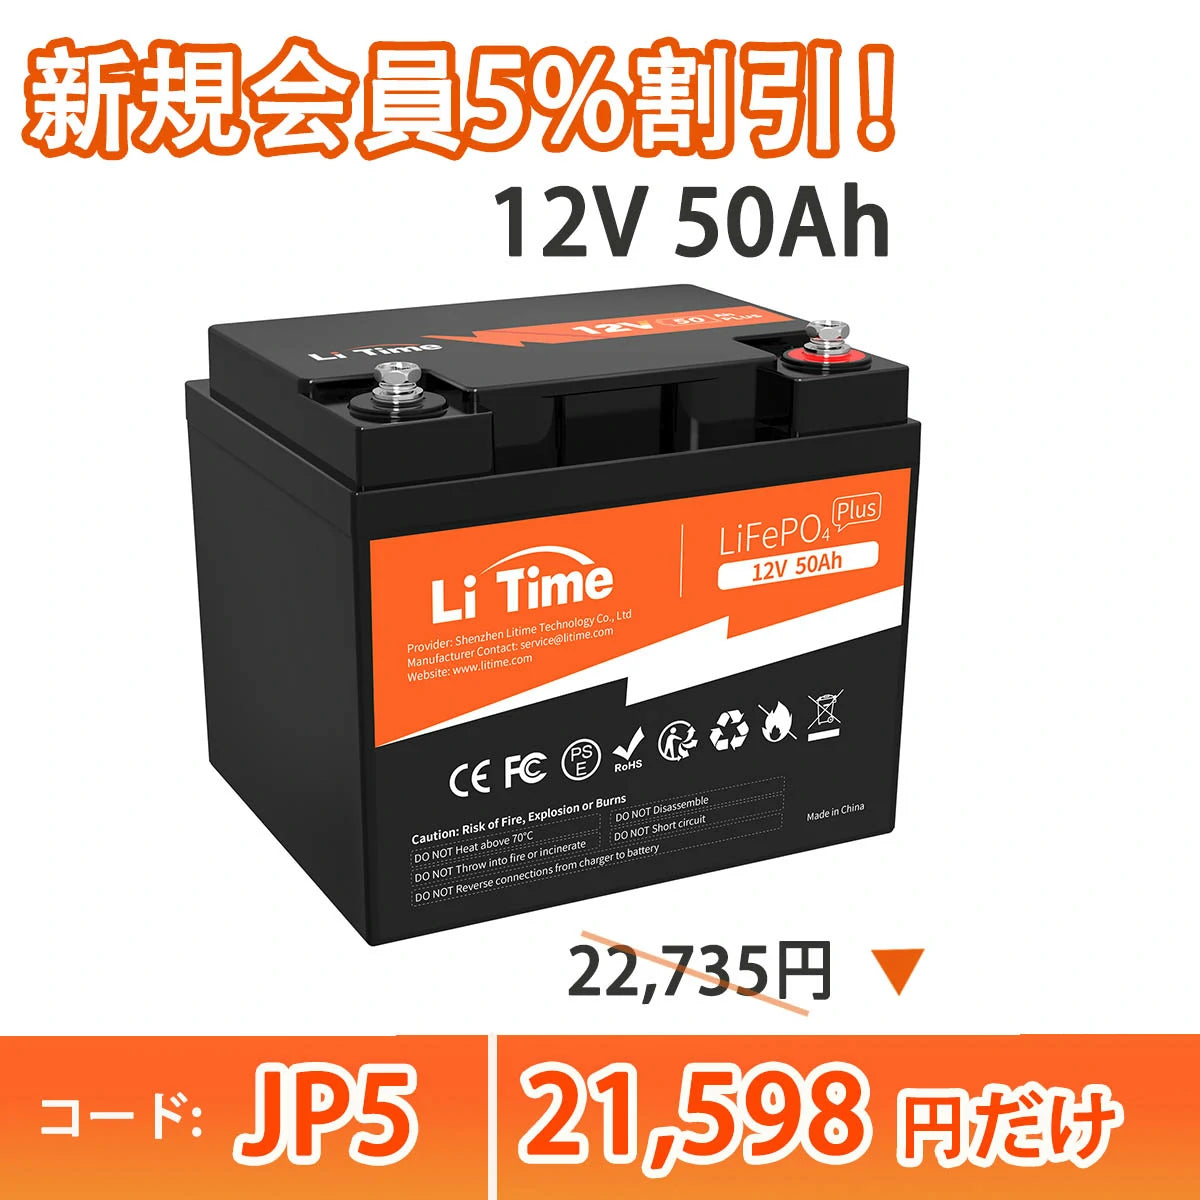 LiTime「Ampere Time 」12V 50Ah LiFePO4 リン酸鉄リチウムイオンバッテリー 内蔵50A BMS https://jp.litime.com/products/12v50ah